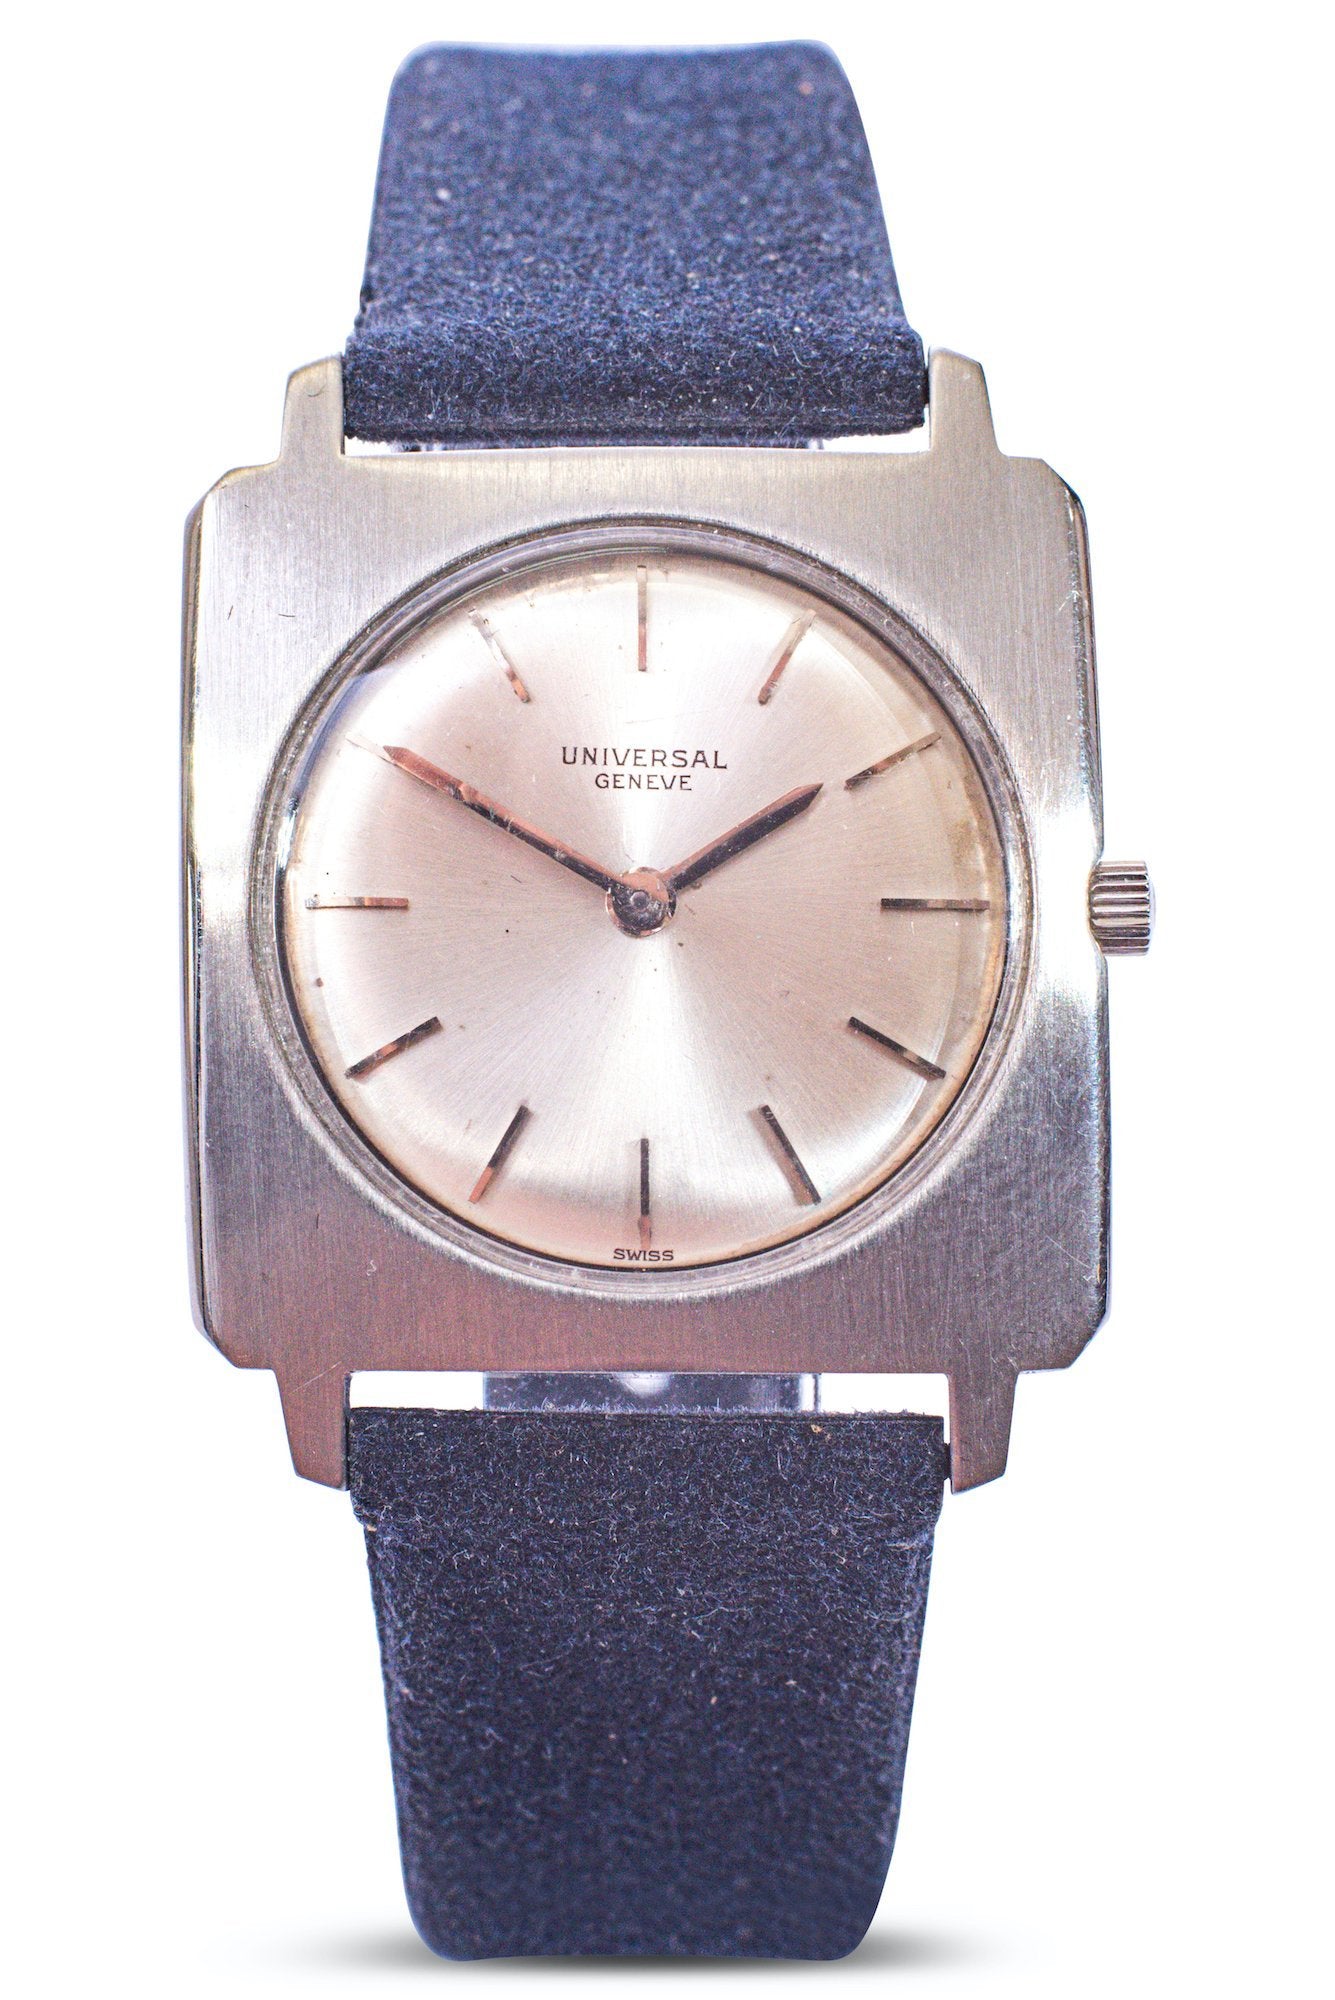 Universal Geneve Square - Counting Time Watch Purveyors